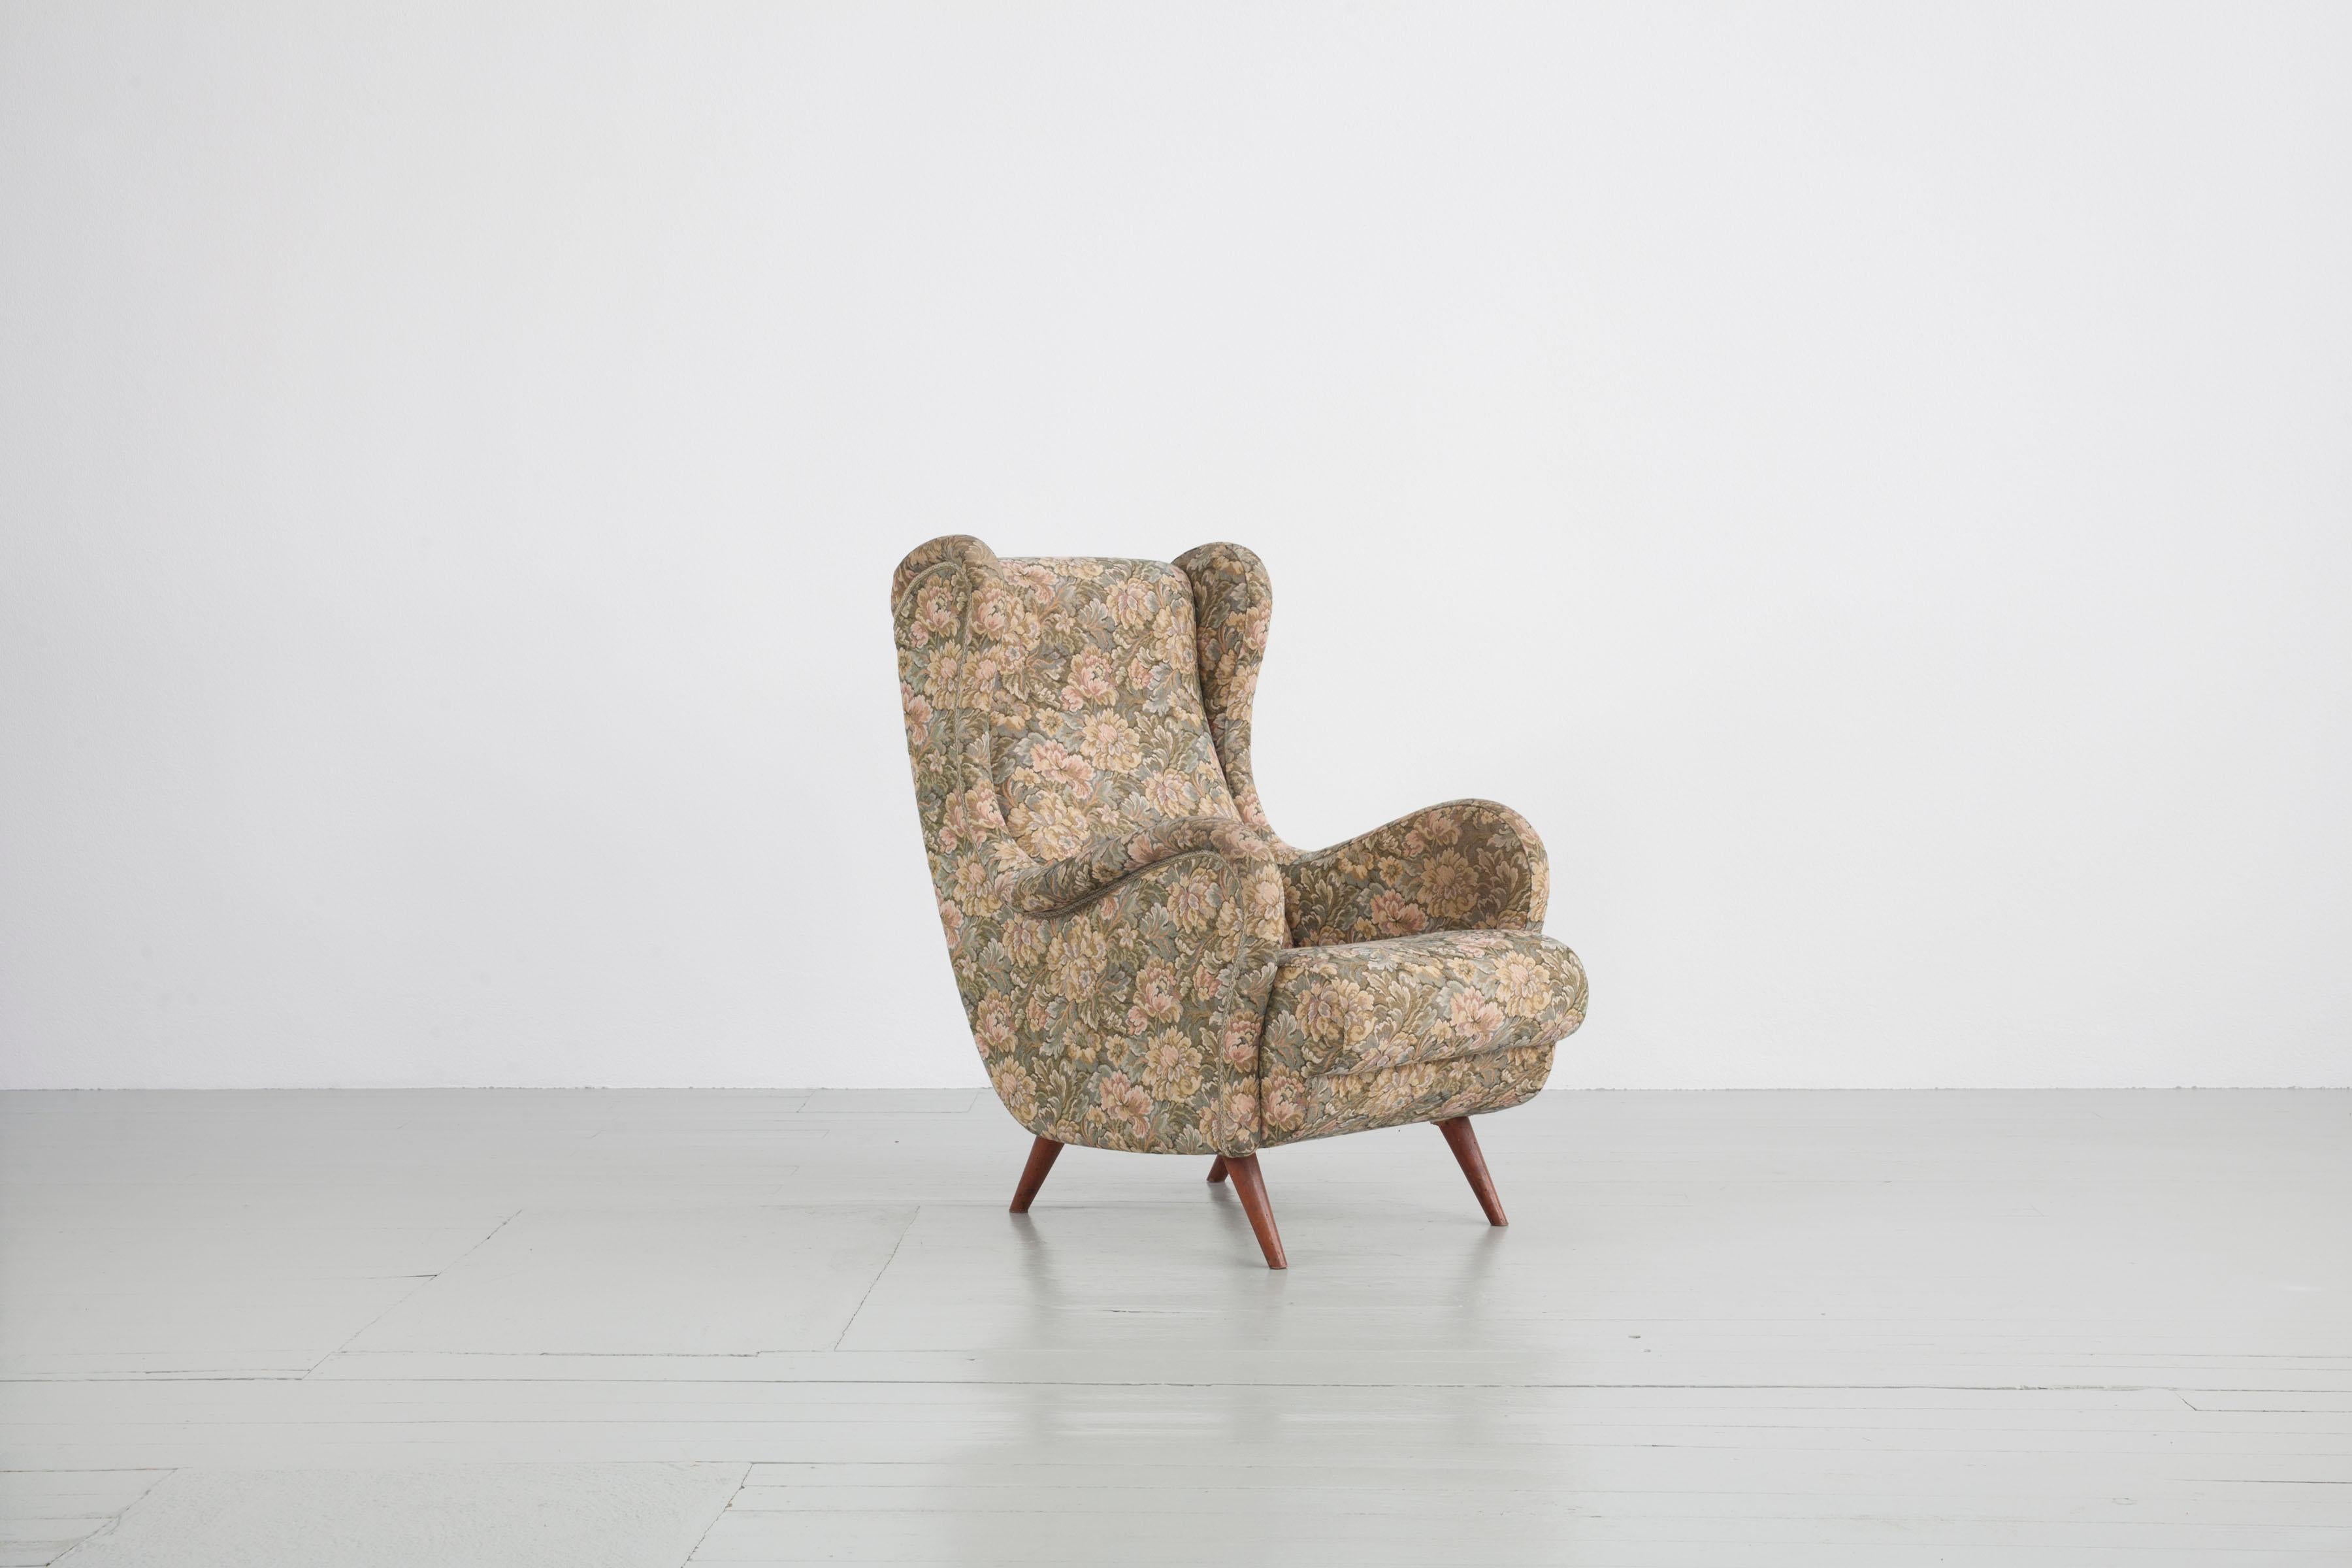 Wingback chair from Italy, 1950s. The chair features an exceptional curved armrest and is upholstered with floral patterned fabric which can be re-upholstered. 

Feel free to contact us for more detailed pictures.